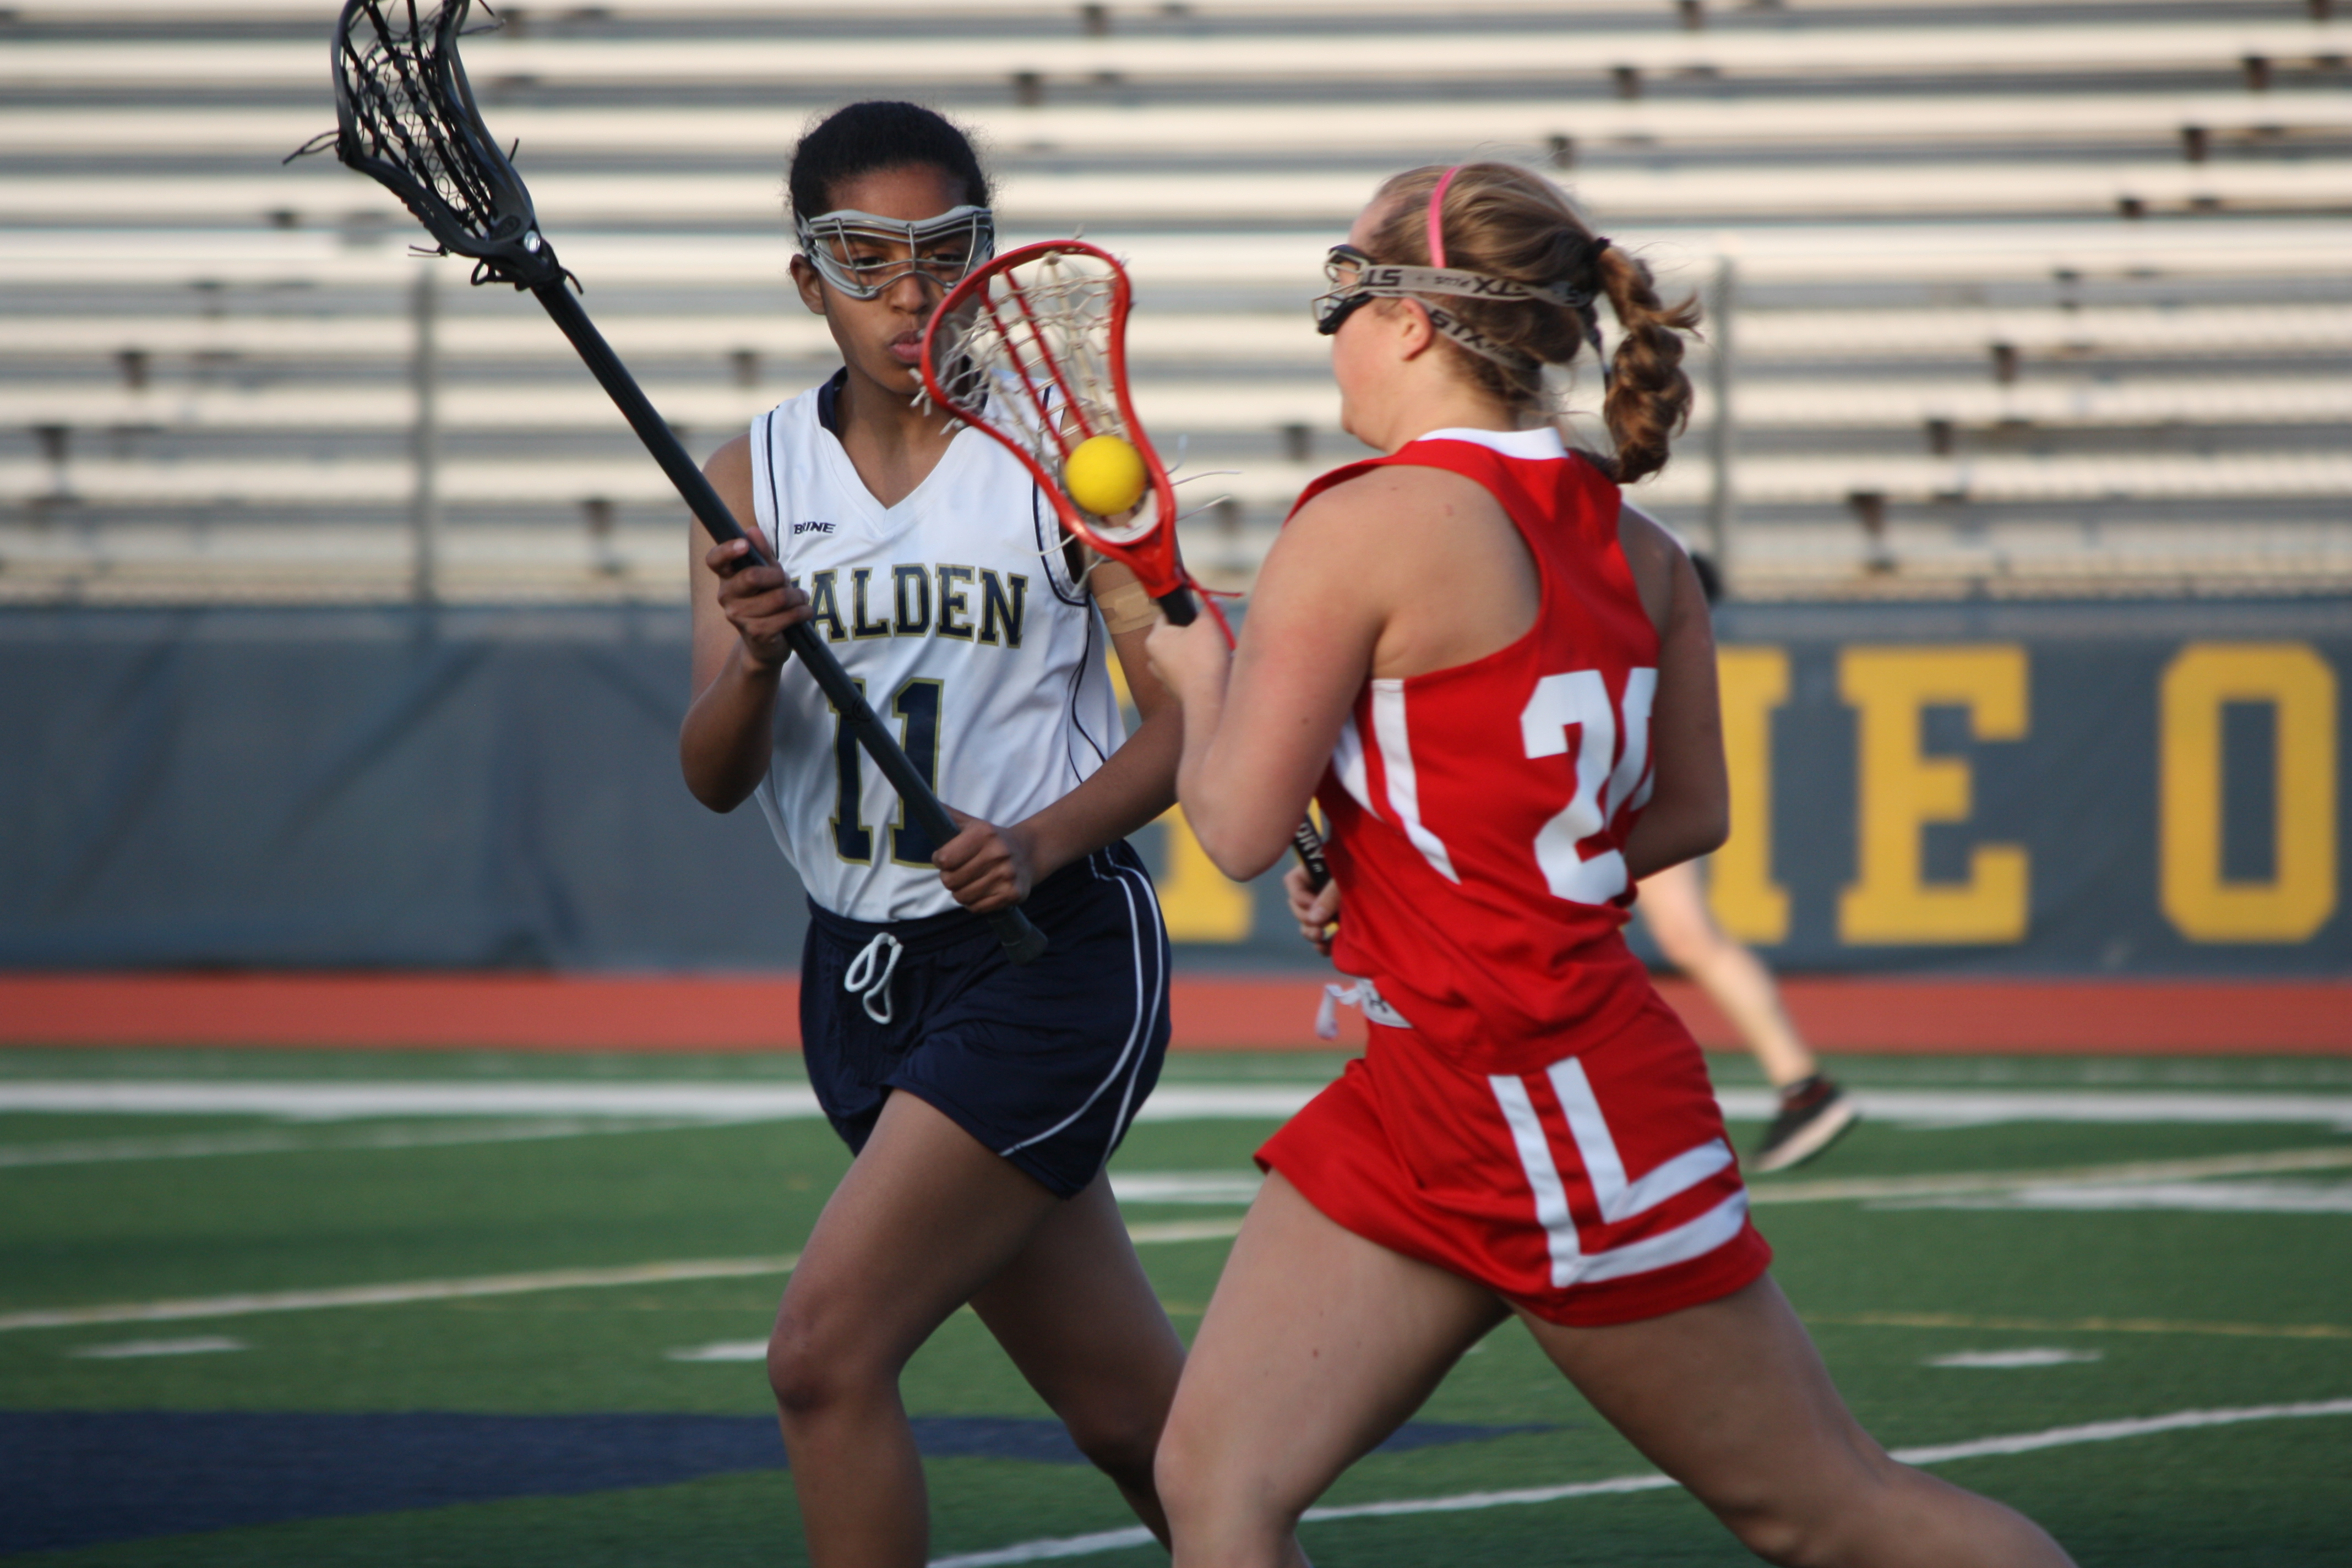 Girls Lacrosse: Start of the Season - The Blue and Gold